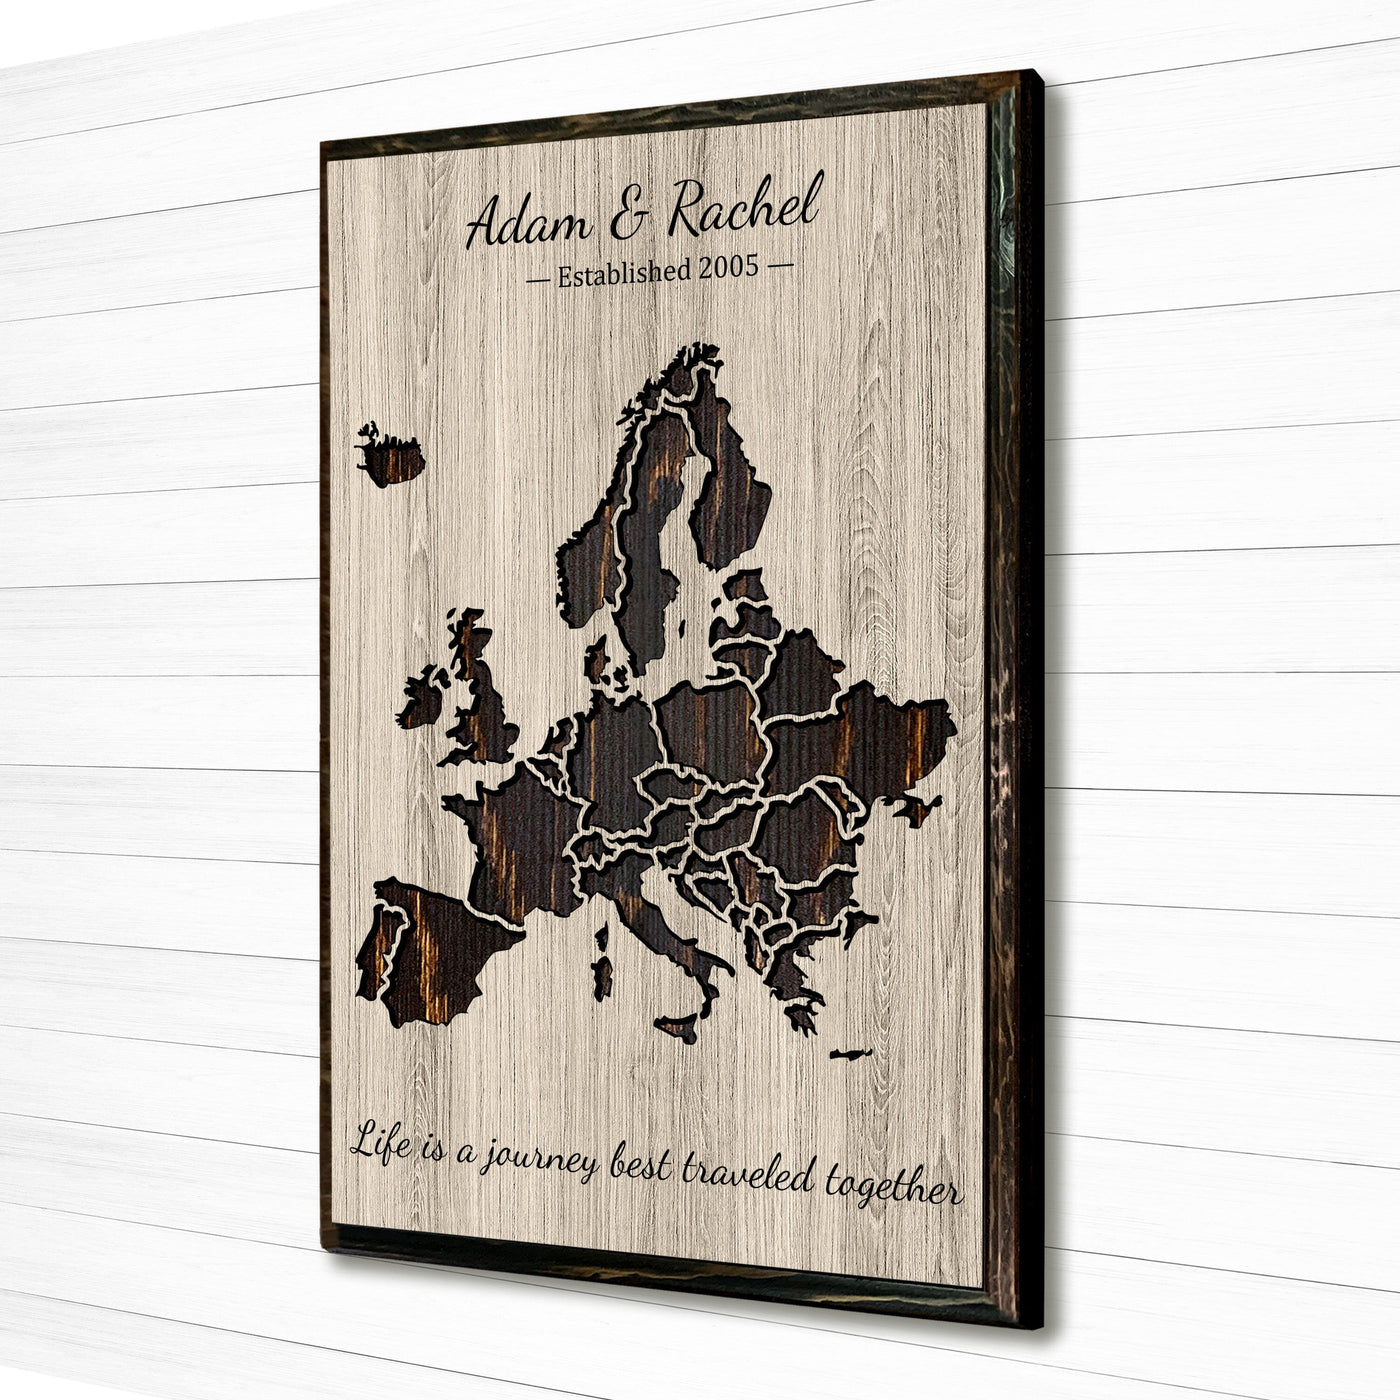 Handcrafted wooden map of Europe, intricately carved to display the continent's borders. Purchase from our large selection of decorative push pins to highlight visited and desired travel destinations across European countries.